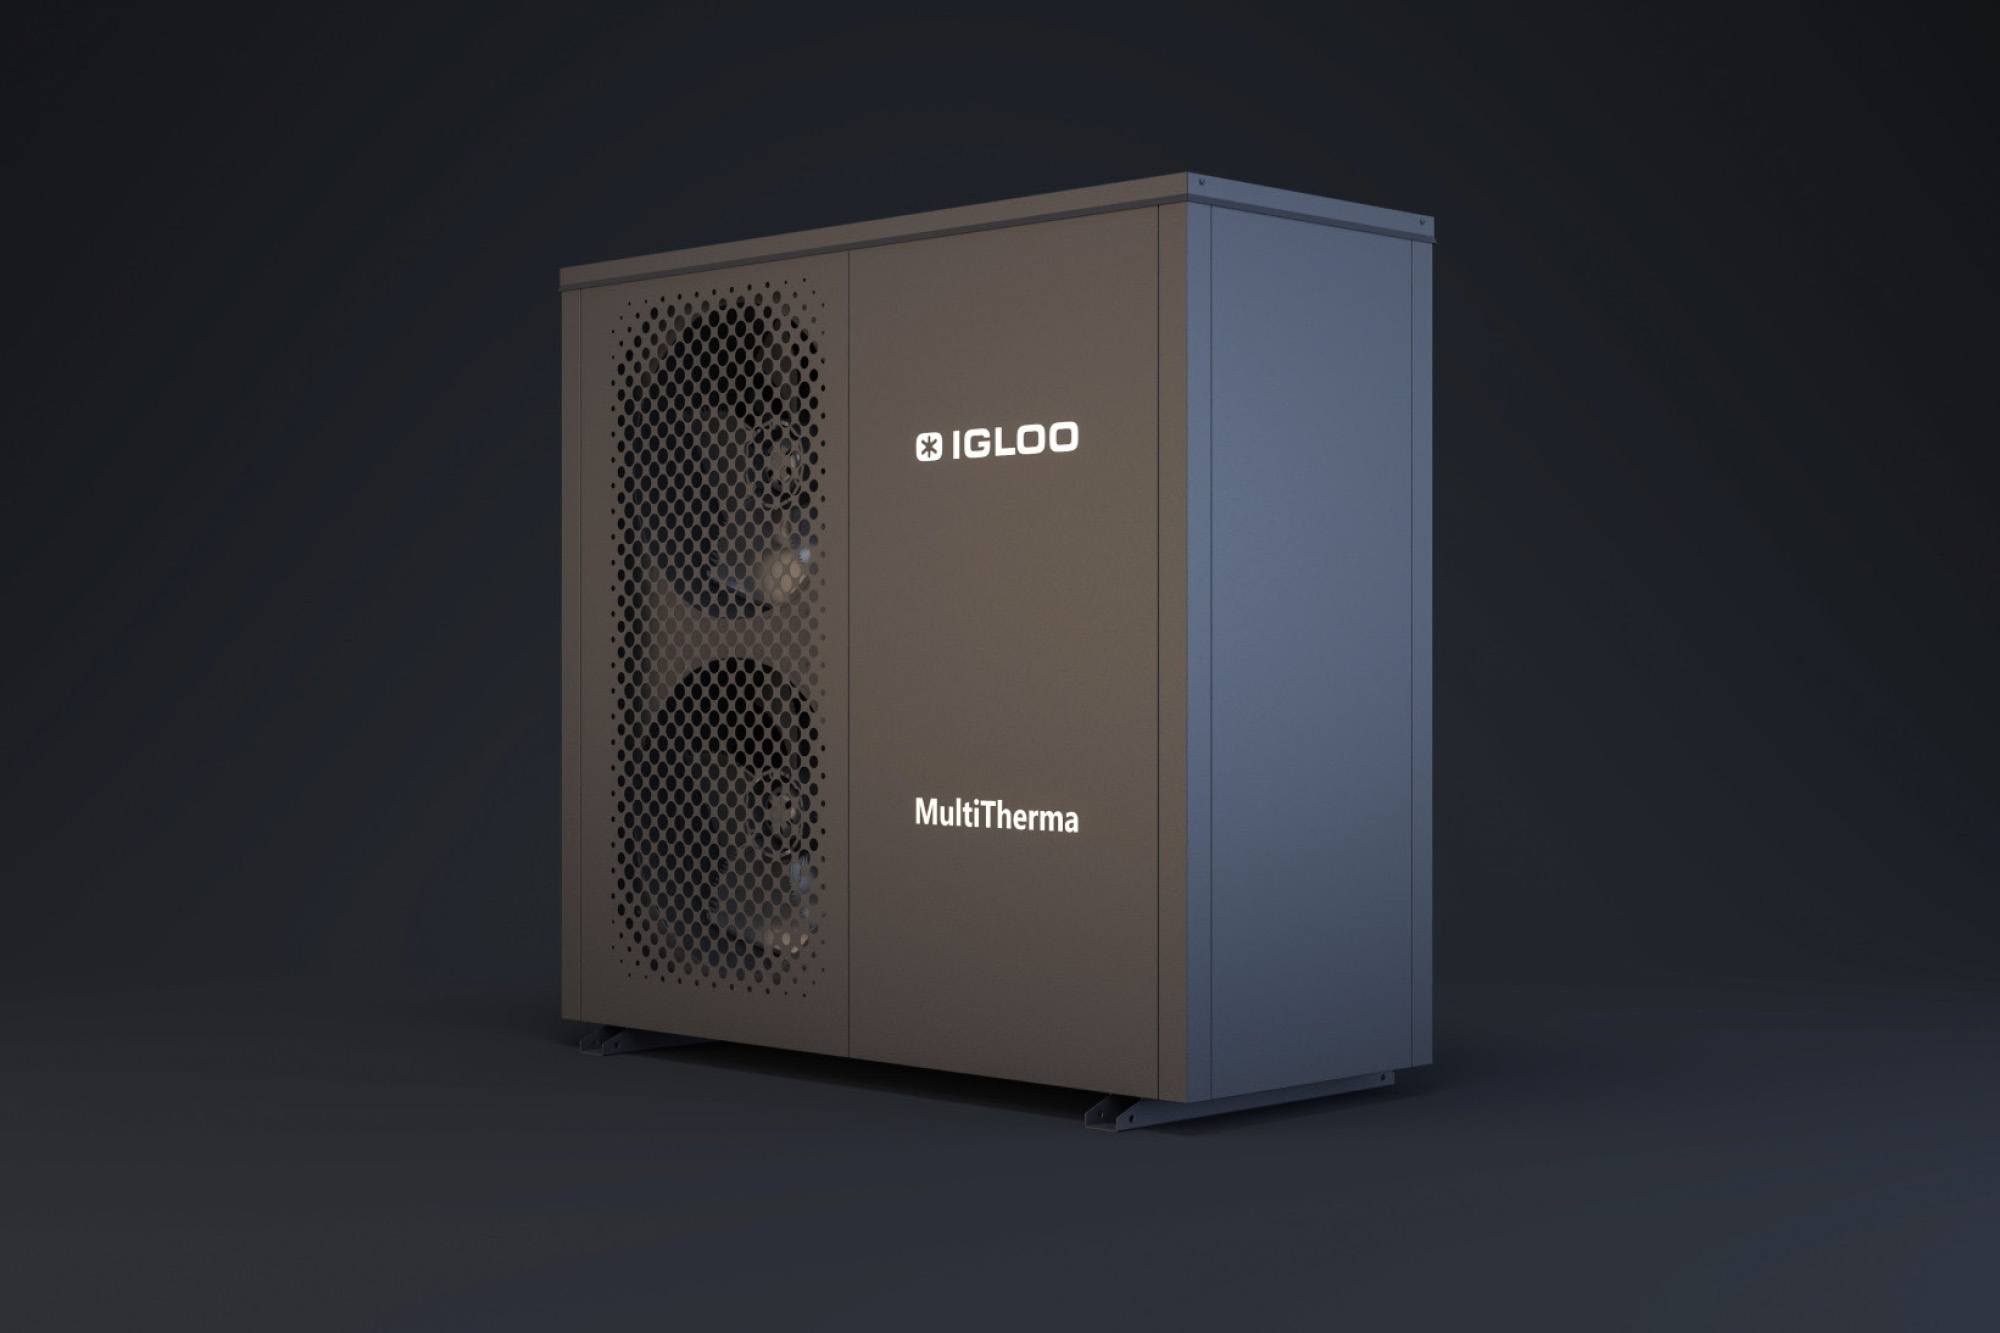 Discover IGLOO MultiTherma - innovative heat pump designed and produced by IGLOO